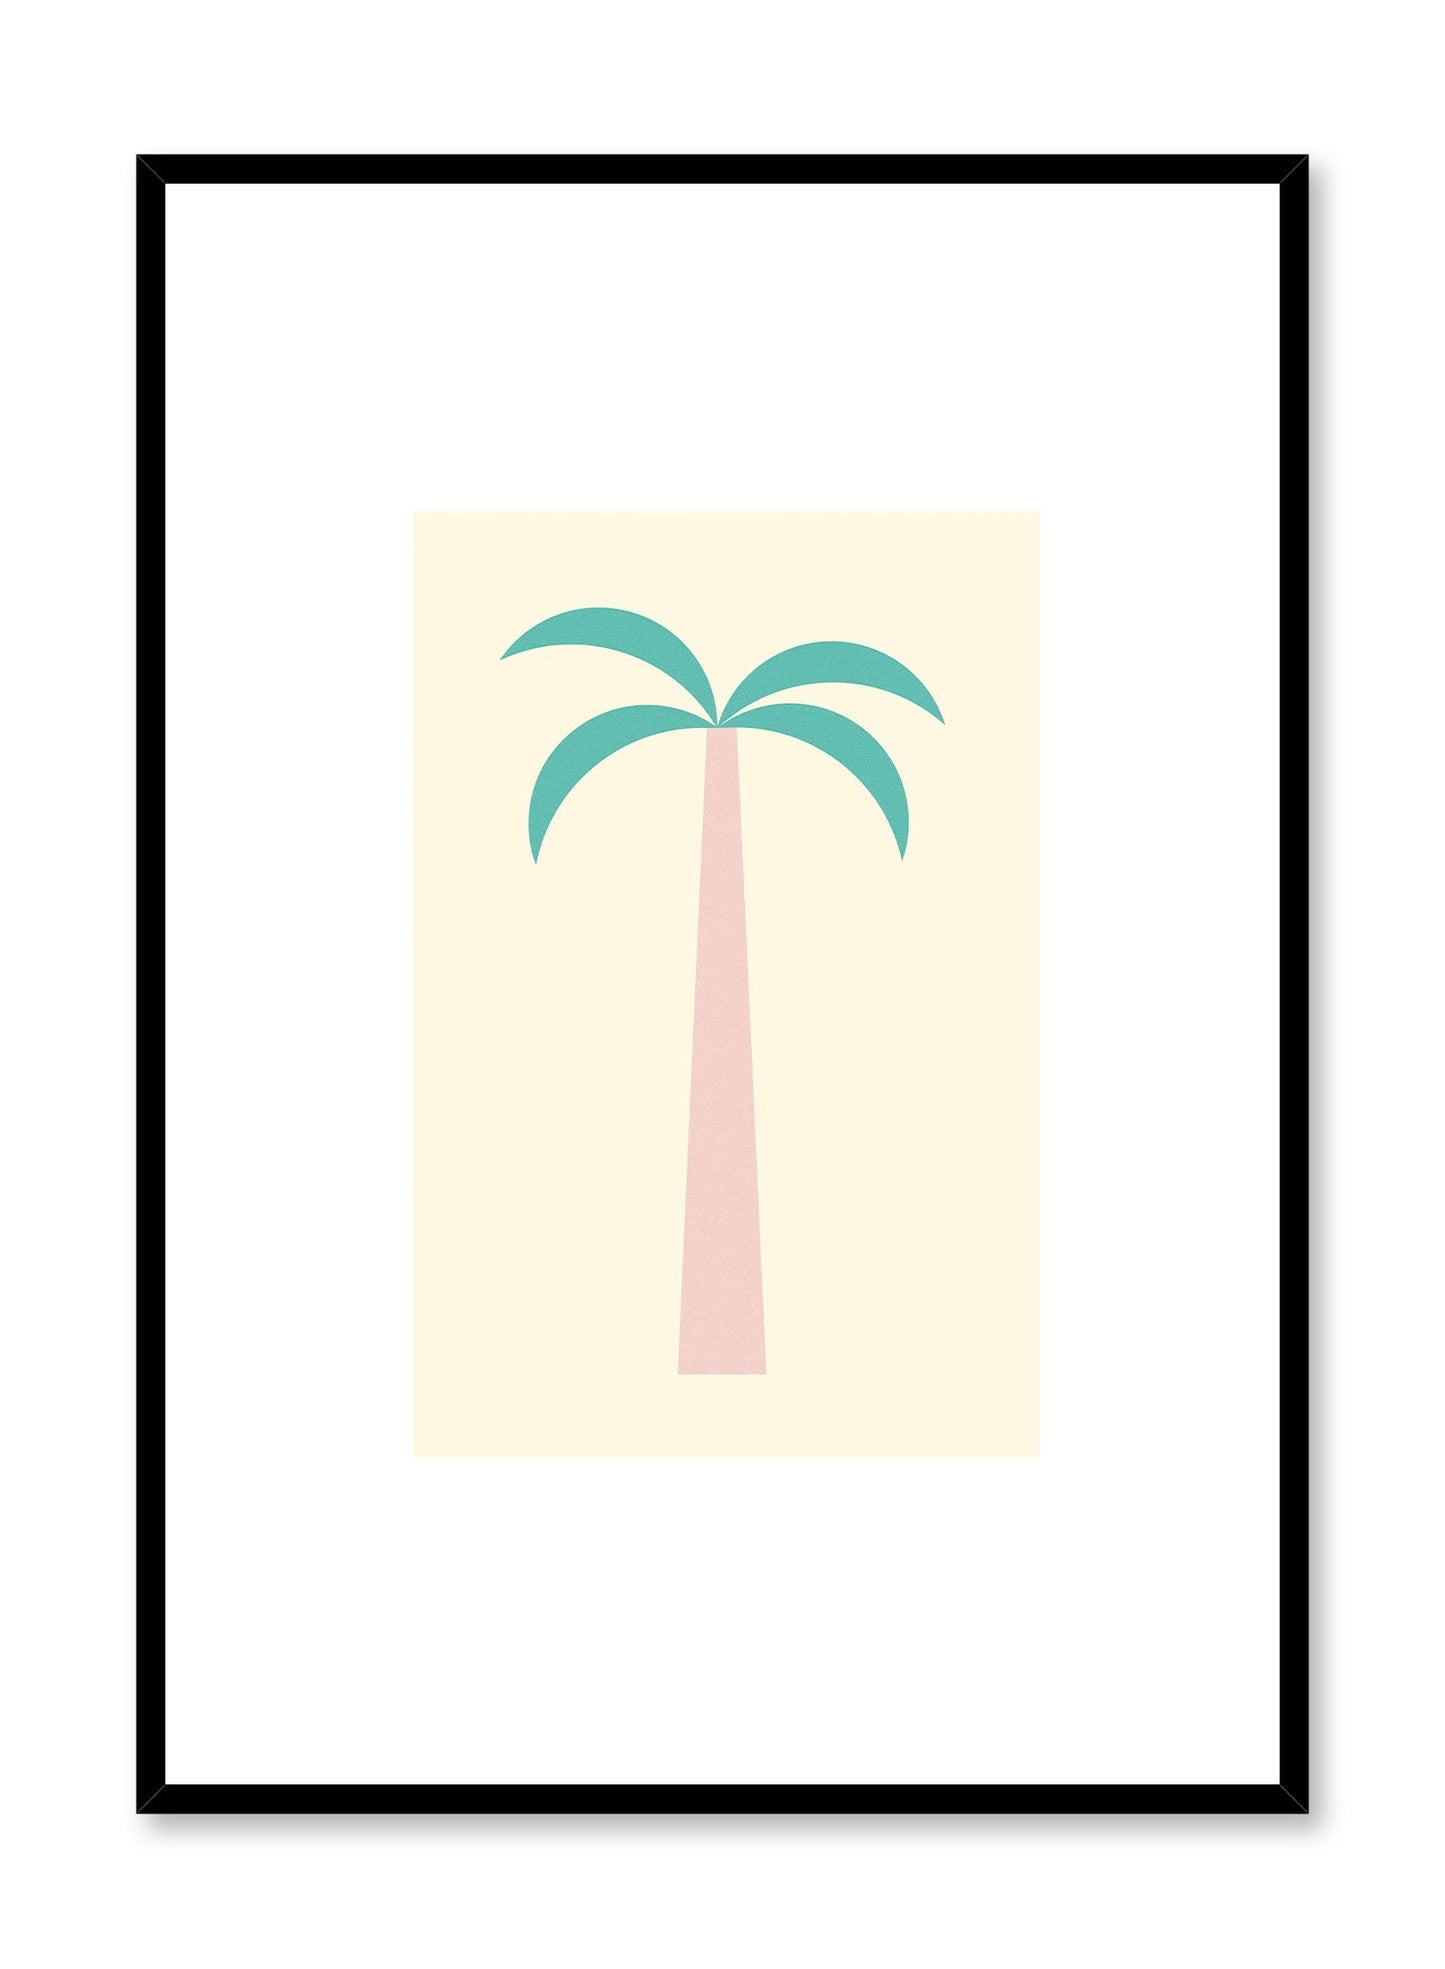 Baby Palm is a minimalist illustration poster of a baby palm tree by Opposite Wall.